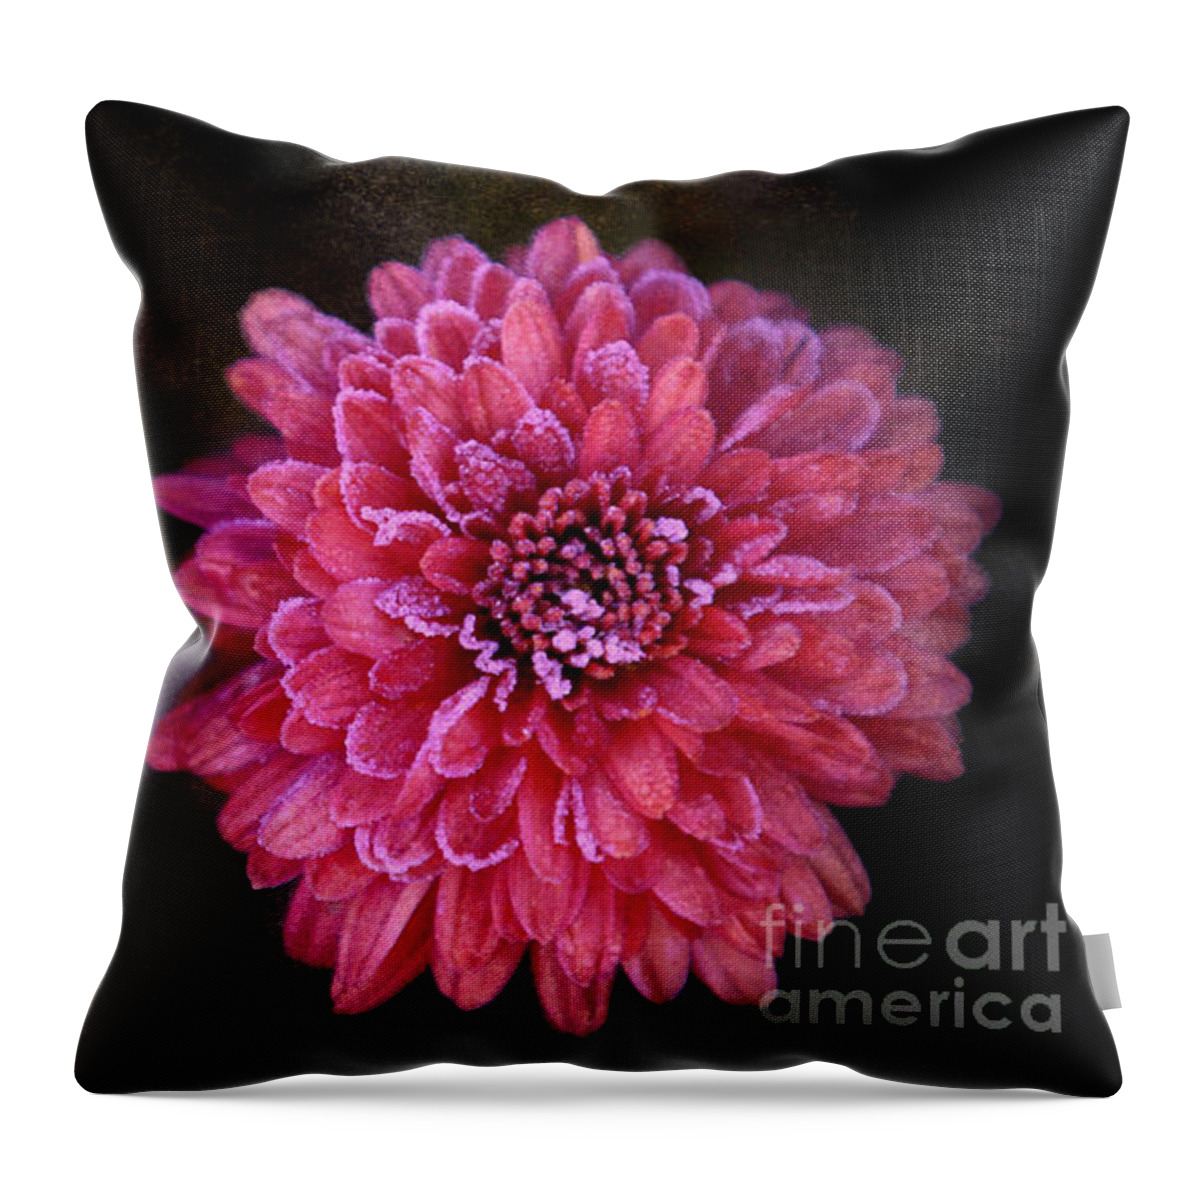 Flowers Throw Pillow featuring the photograph Fall's Frosty Mums by Elizabeth Winter